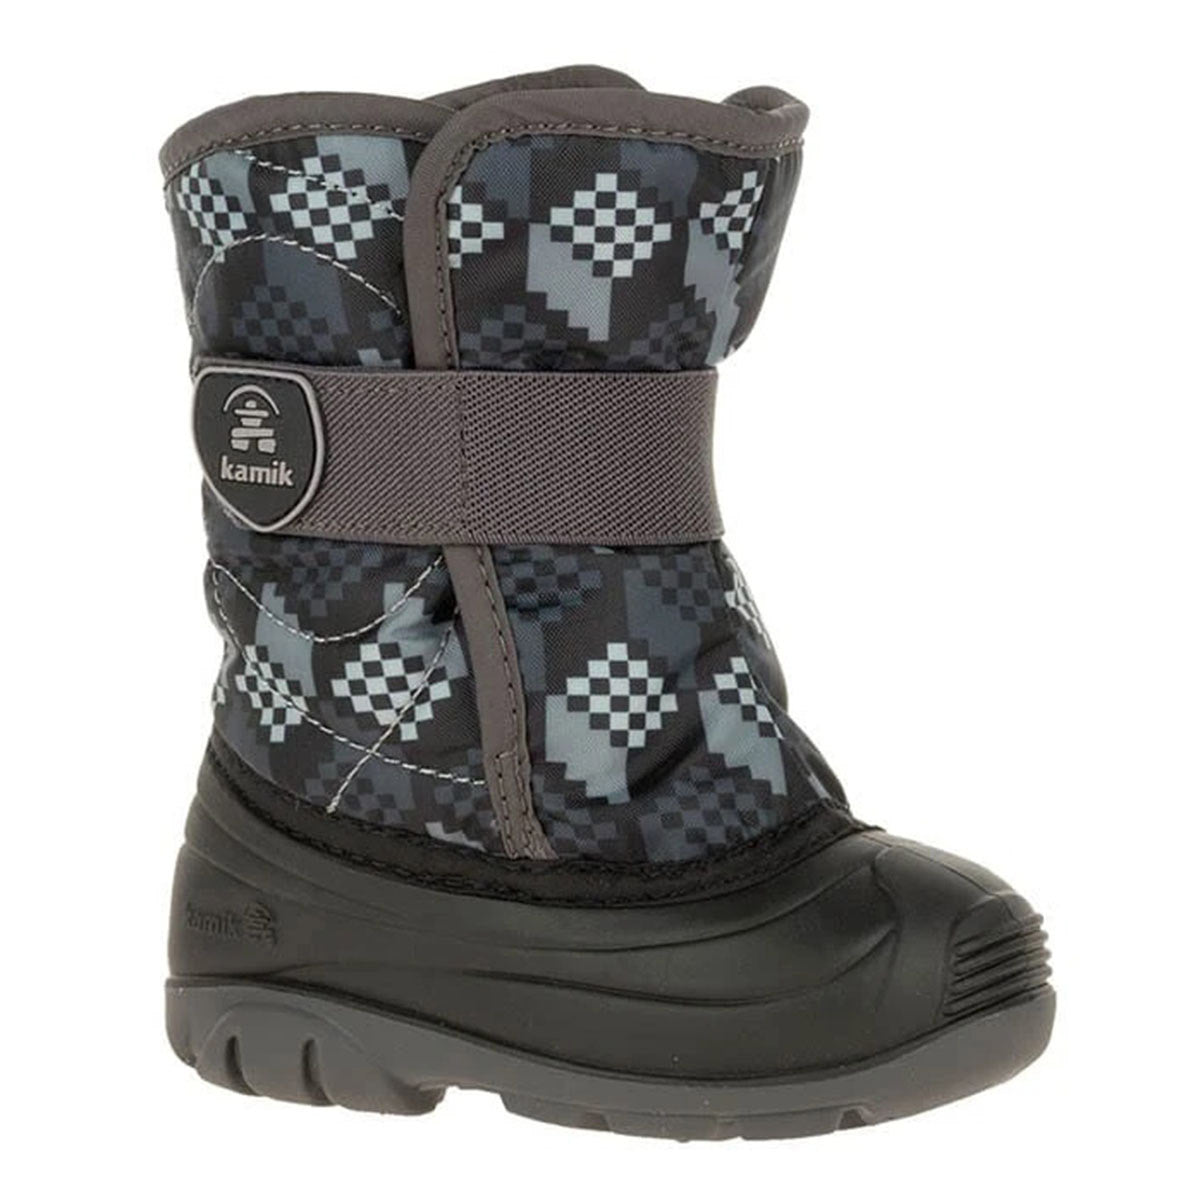 A toddler's Kamik KAMIK SNOWBUG 4 BLACK/CHARCOAL winter boot with a pixelated camouflage pattern and a black rubber sole.